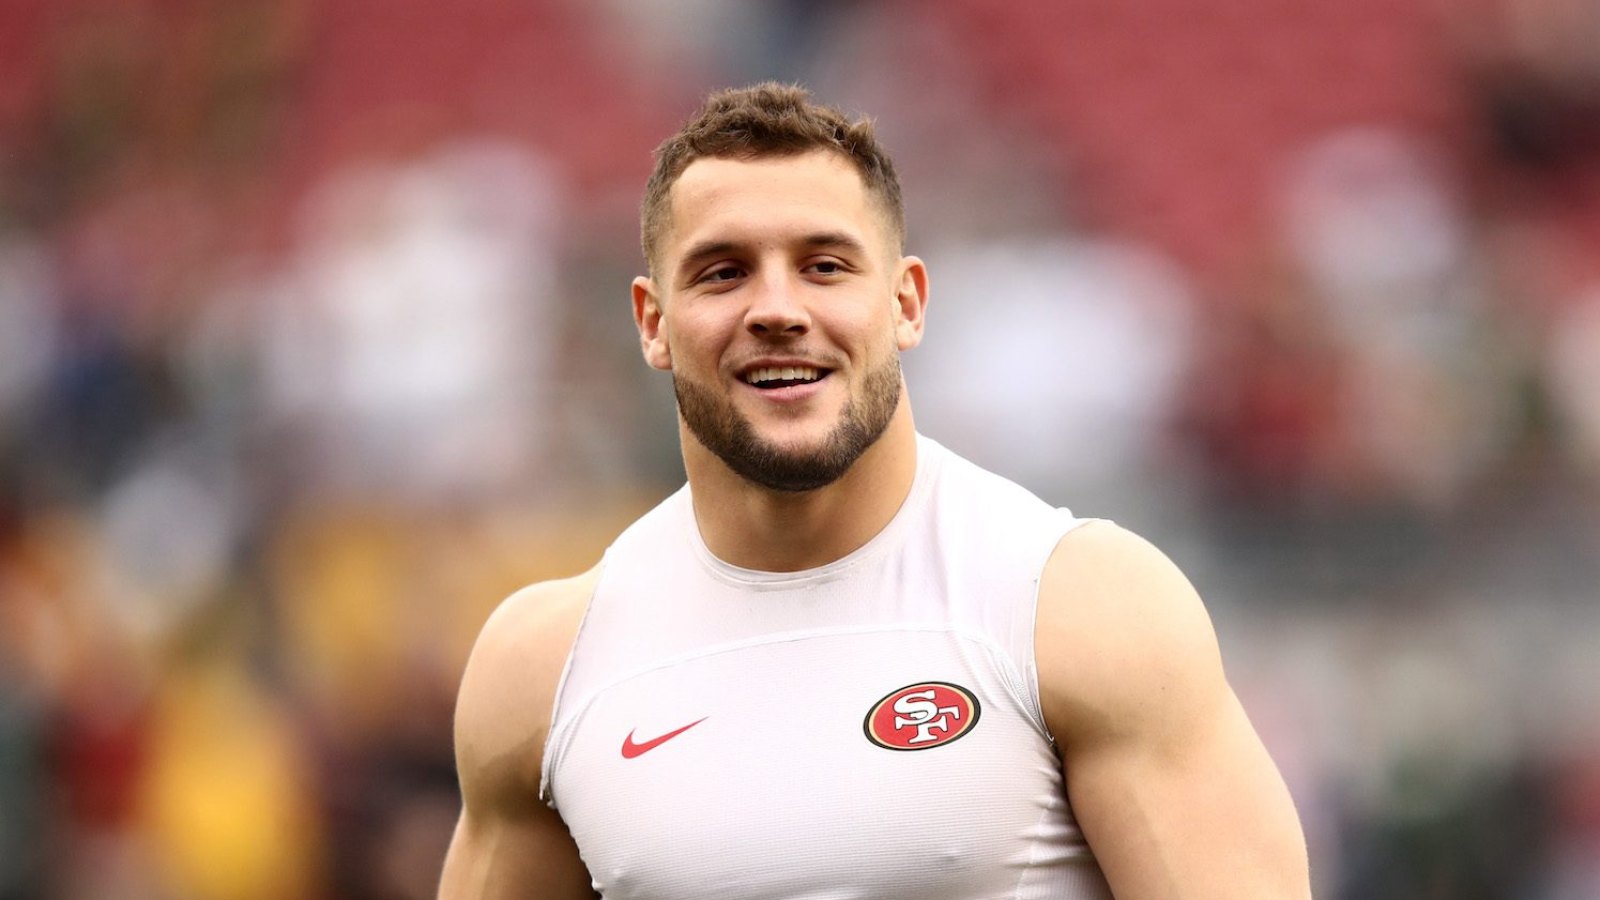 Nick Bosa Is More Than Just a Skims Model